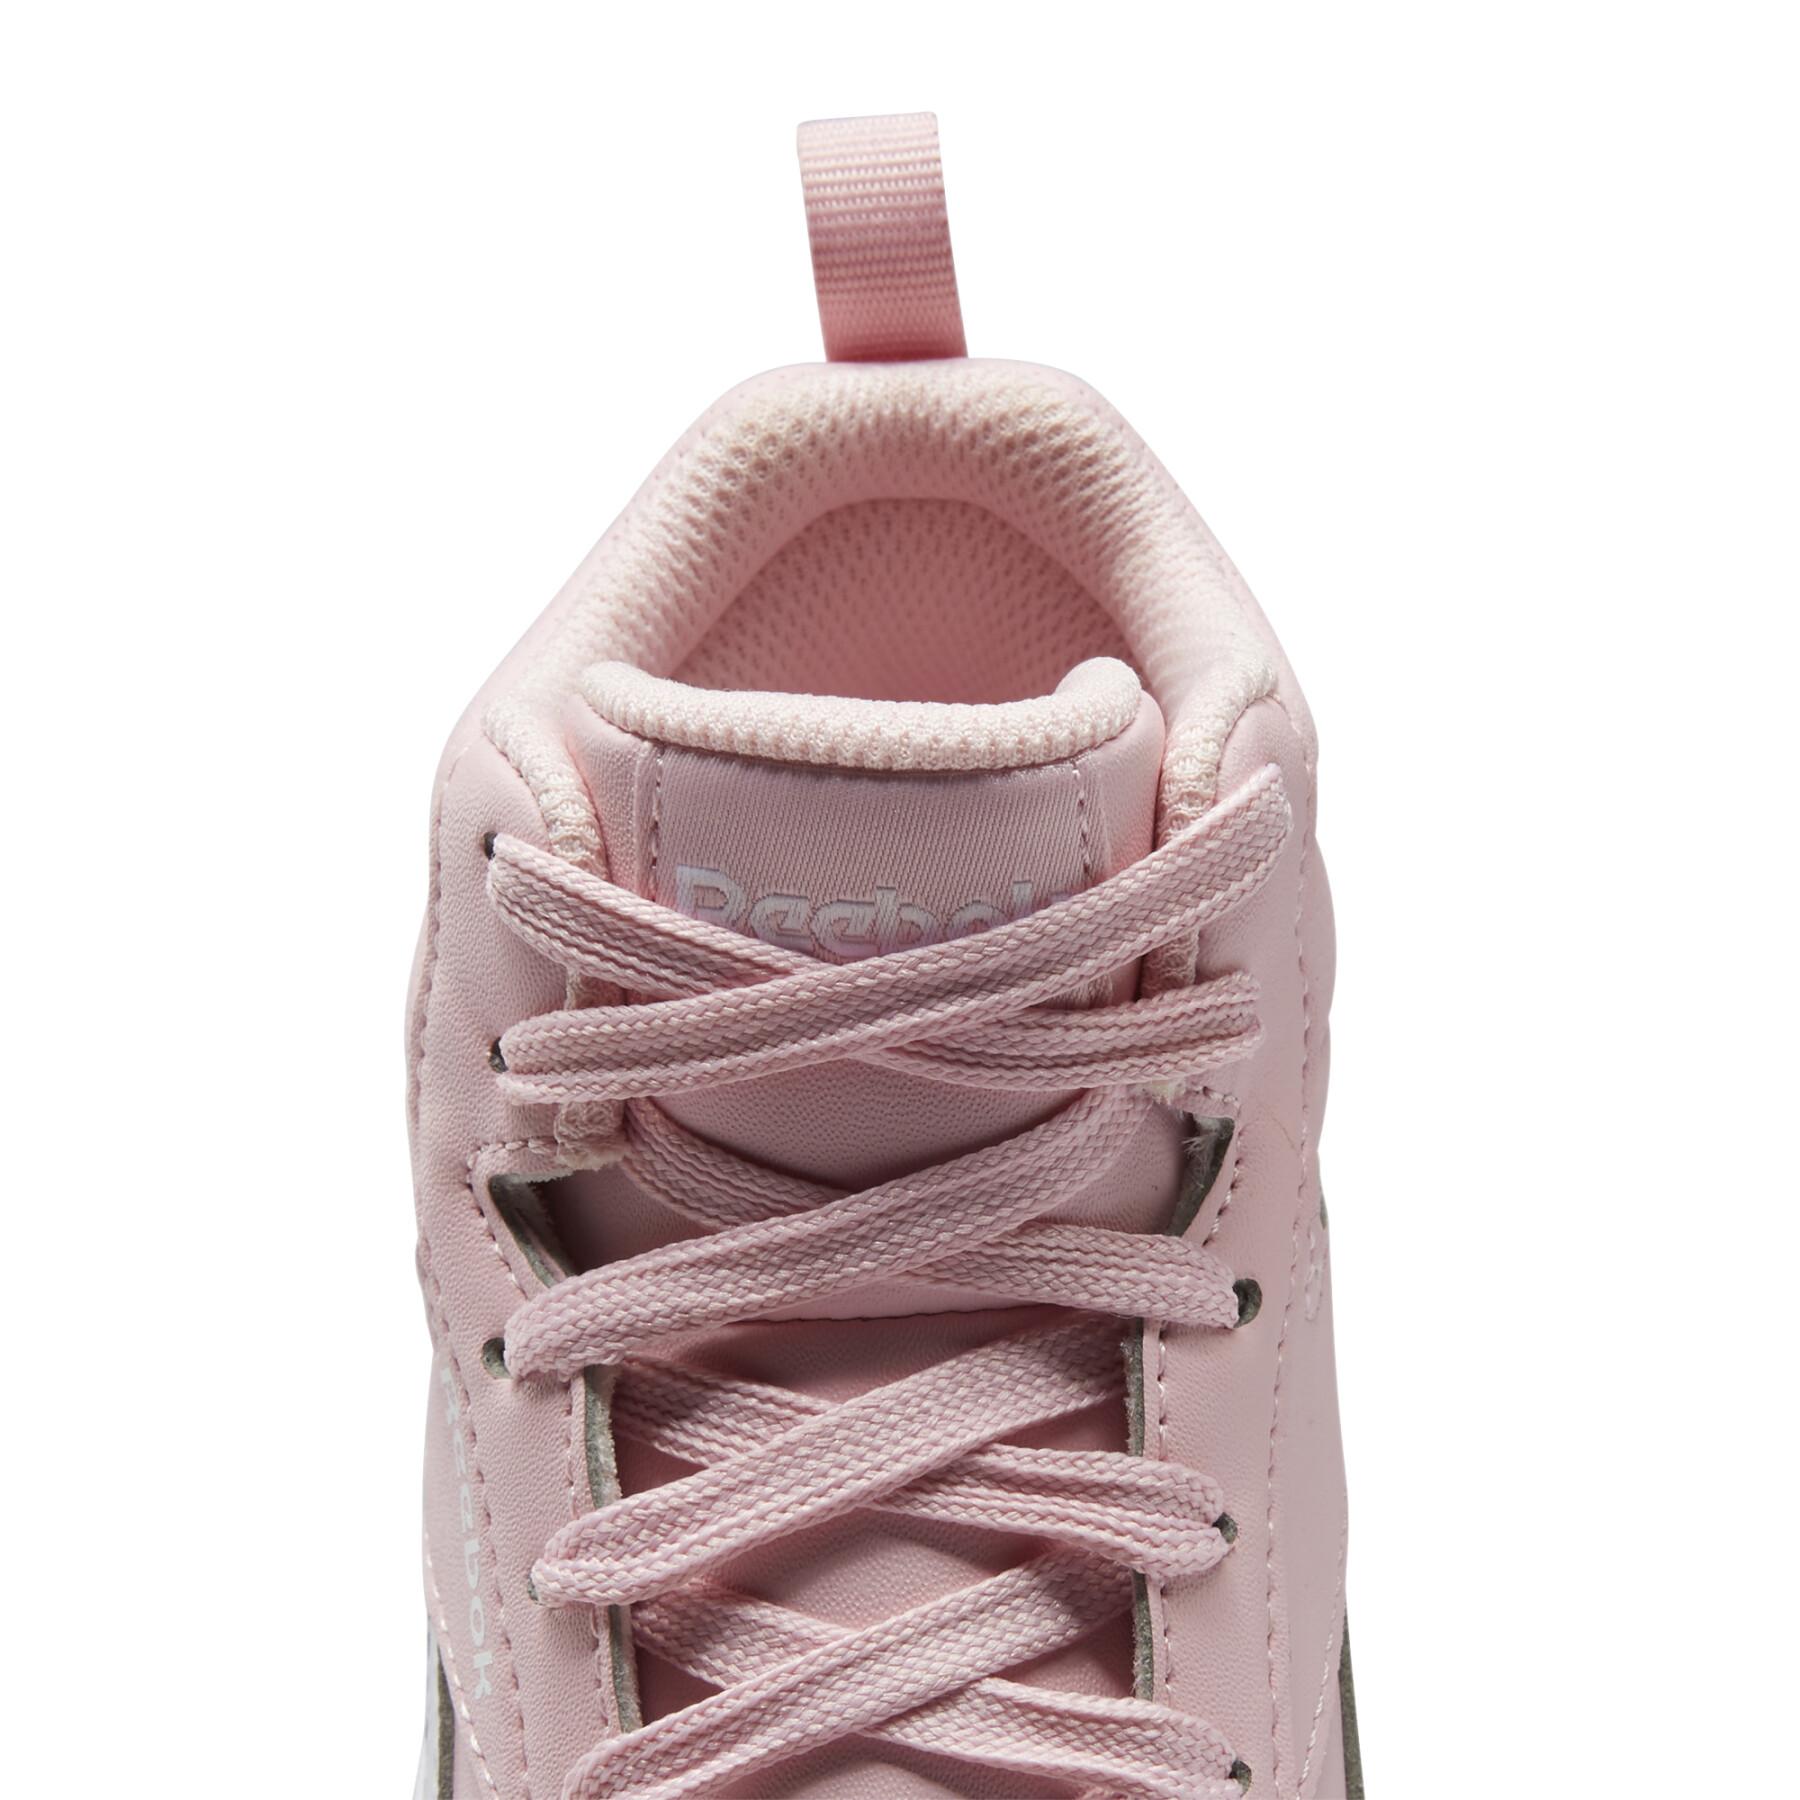 Chaussures fille Reebok Royal Prime Mid 2